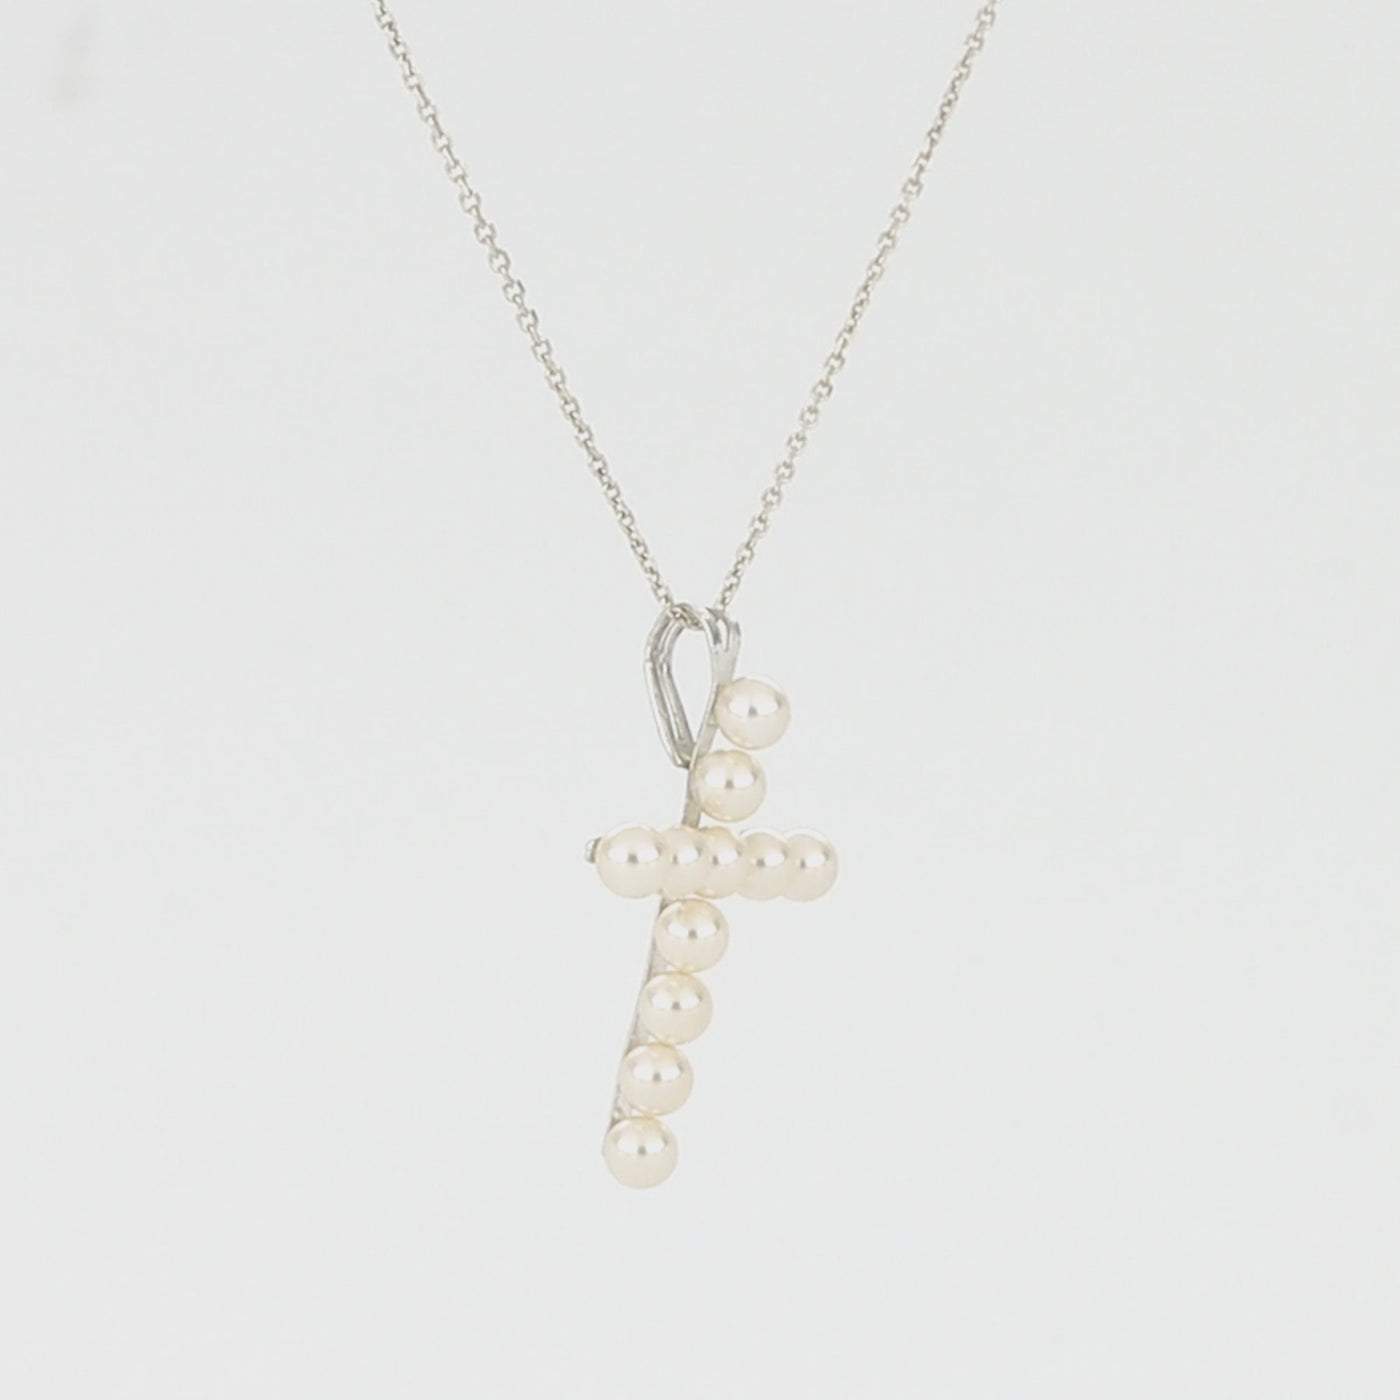 "The Wisdom" Cross Pendant with Pearls